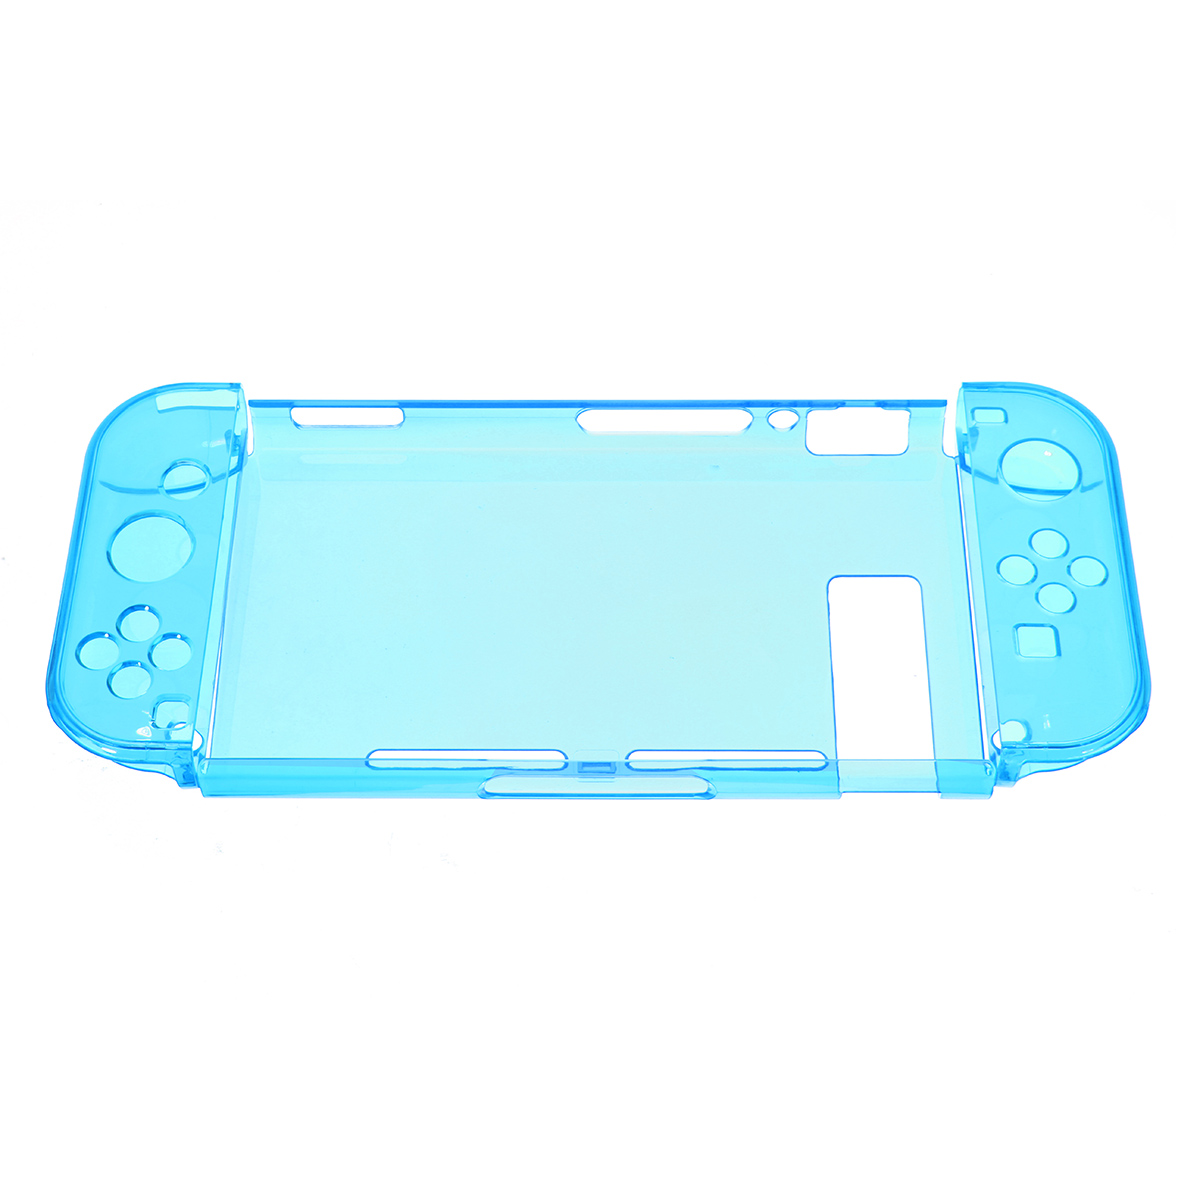 Detachable-Protective-Hard-Case-Cover-Shell-Skin-For-Nintendo-Switch-Joy-Con-Gamepad-Game-Console-1431741-7